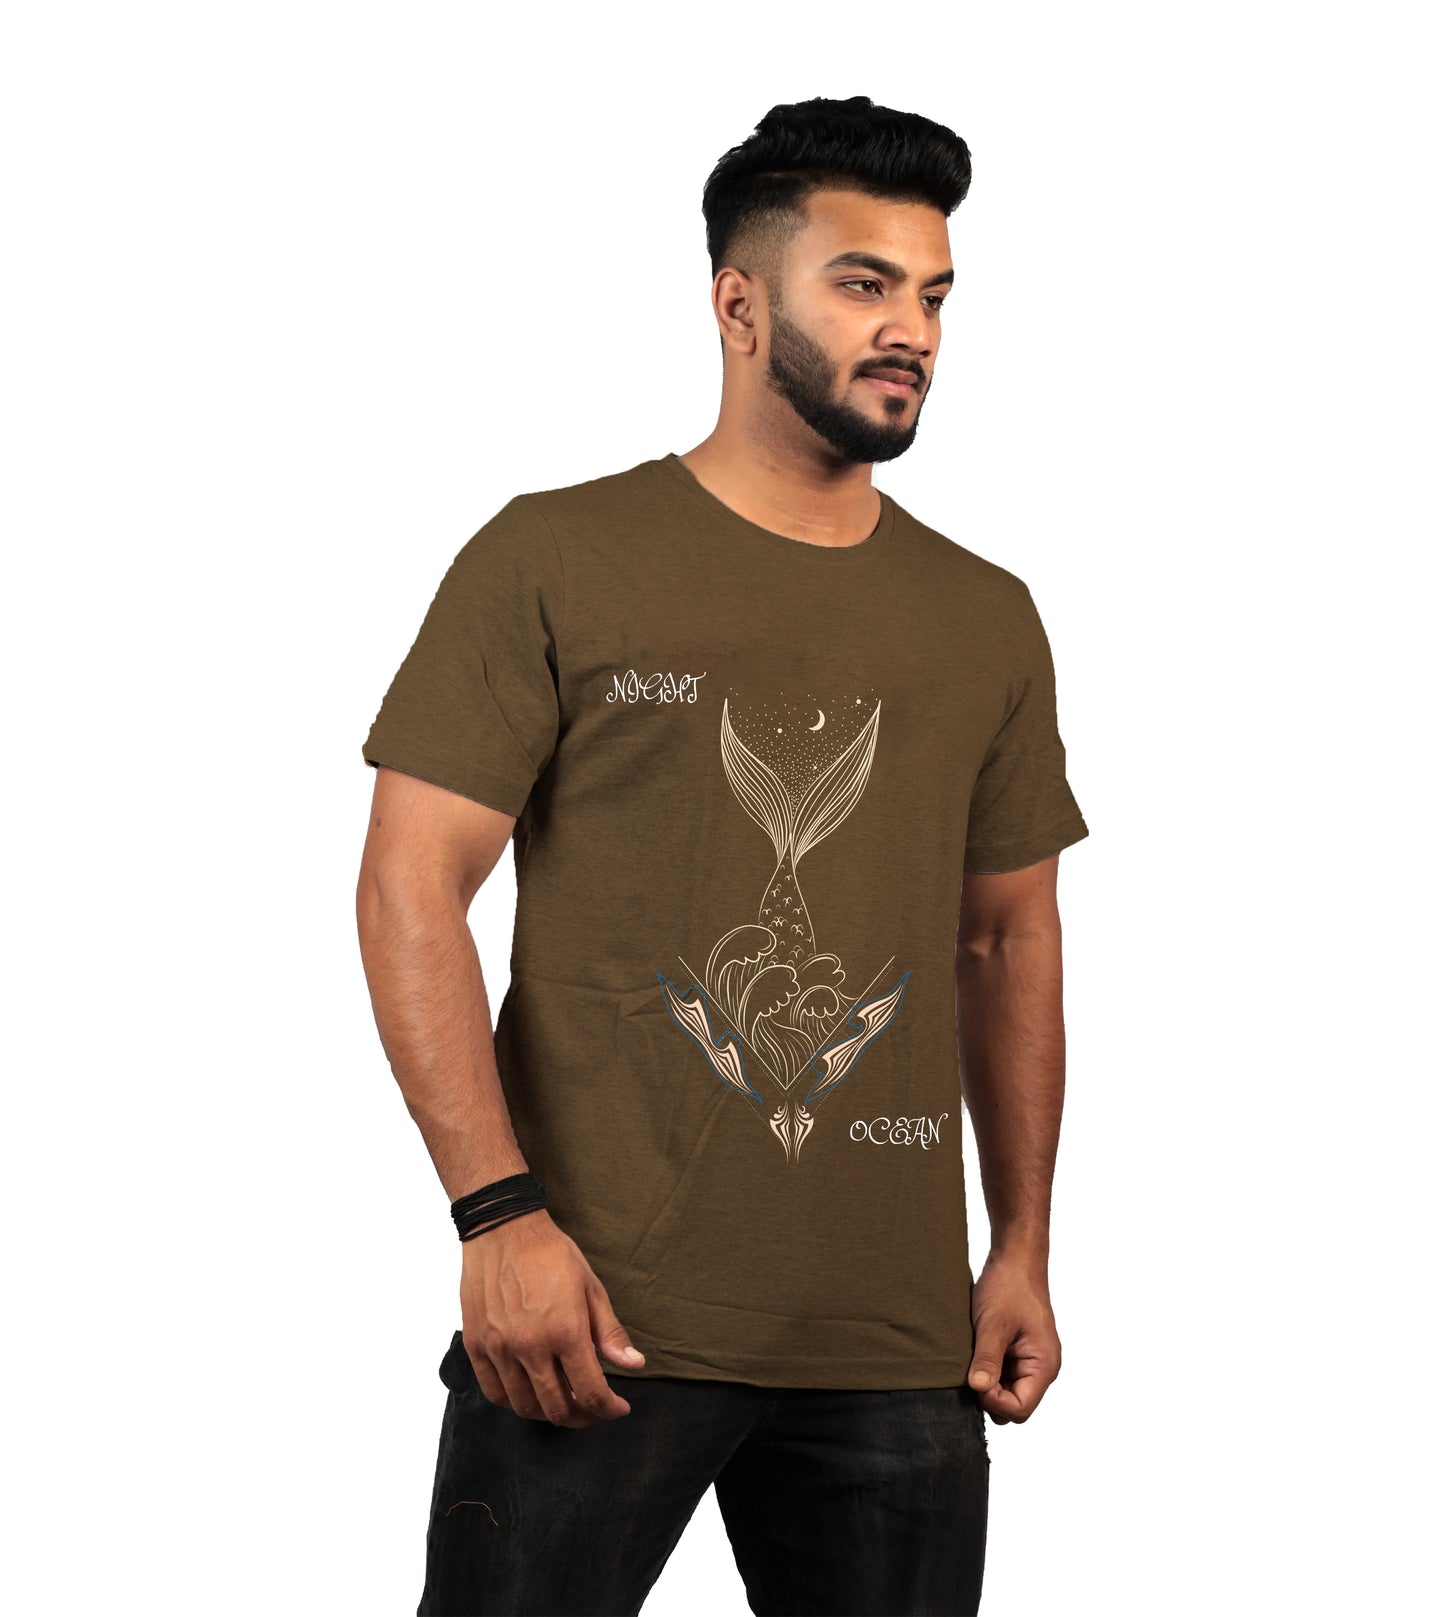 Nirvana Night Mermaid T-shirt In Olive Green Color For Men